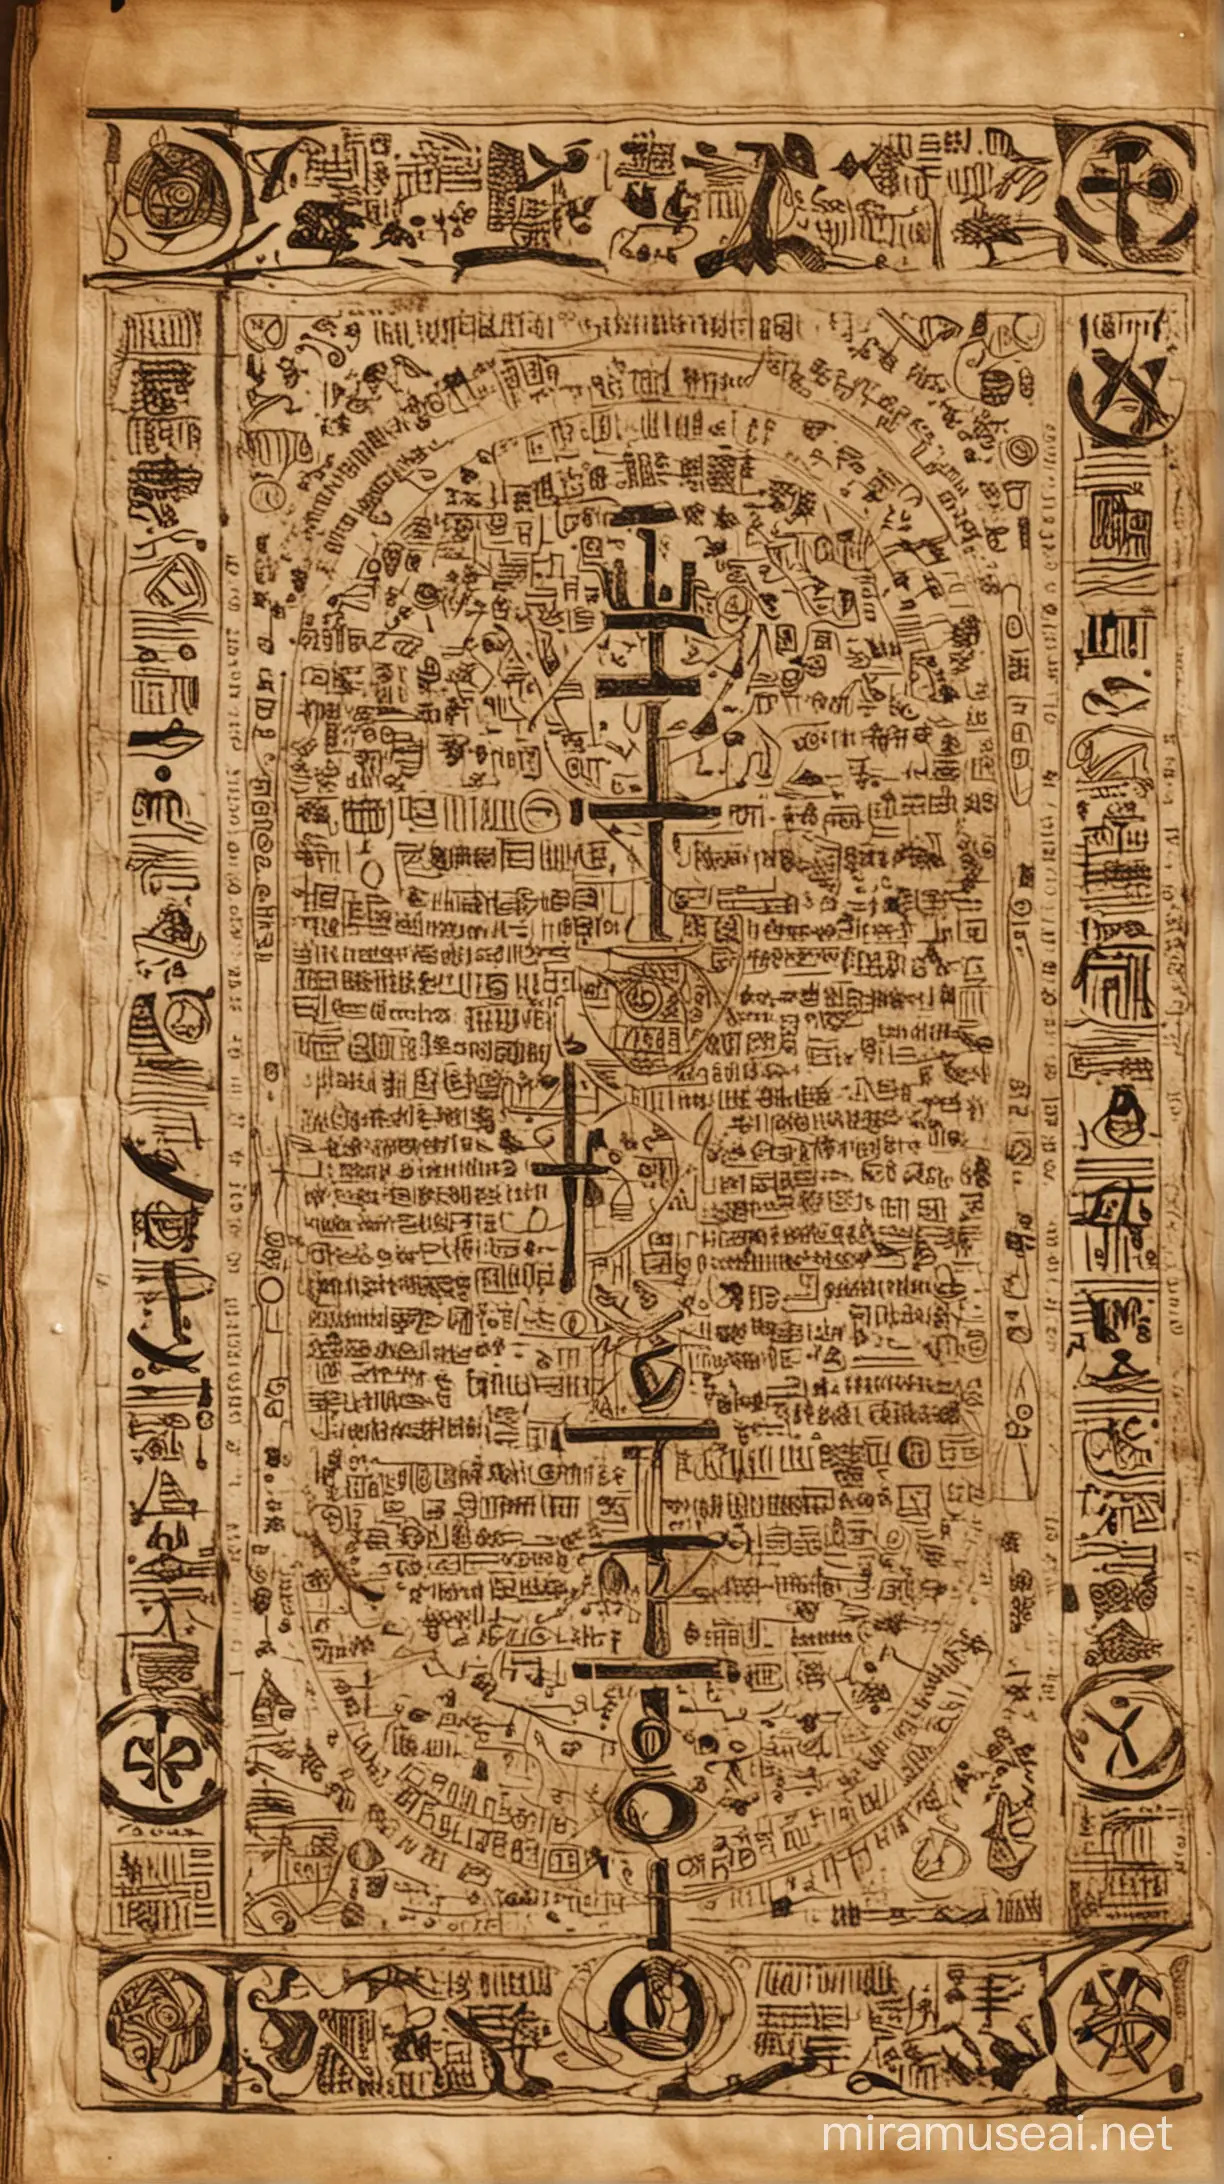 An image of an ancient book filled with mysterious symbols and writings, representing the pages of the Enoch Book being unveiled.
